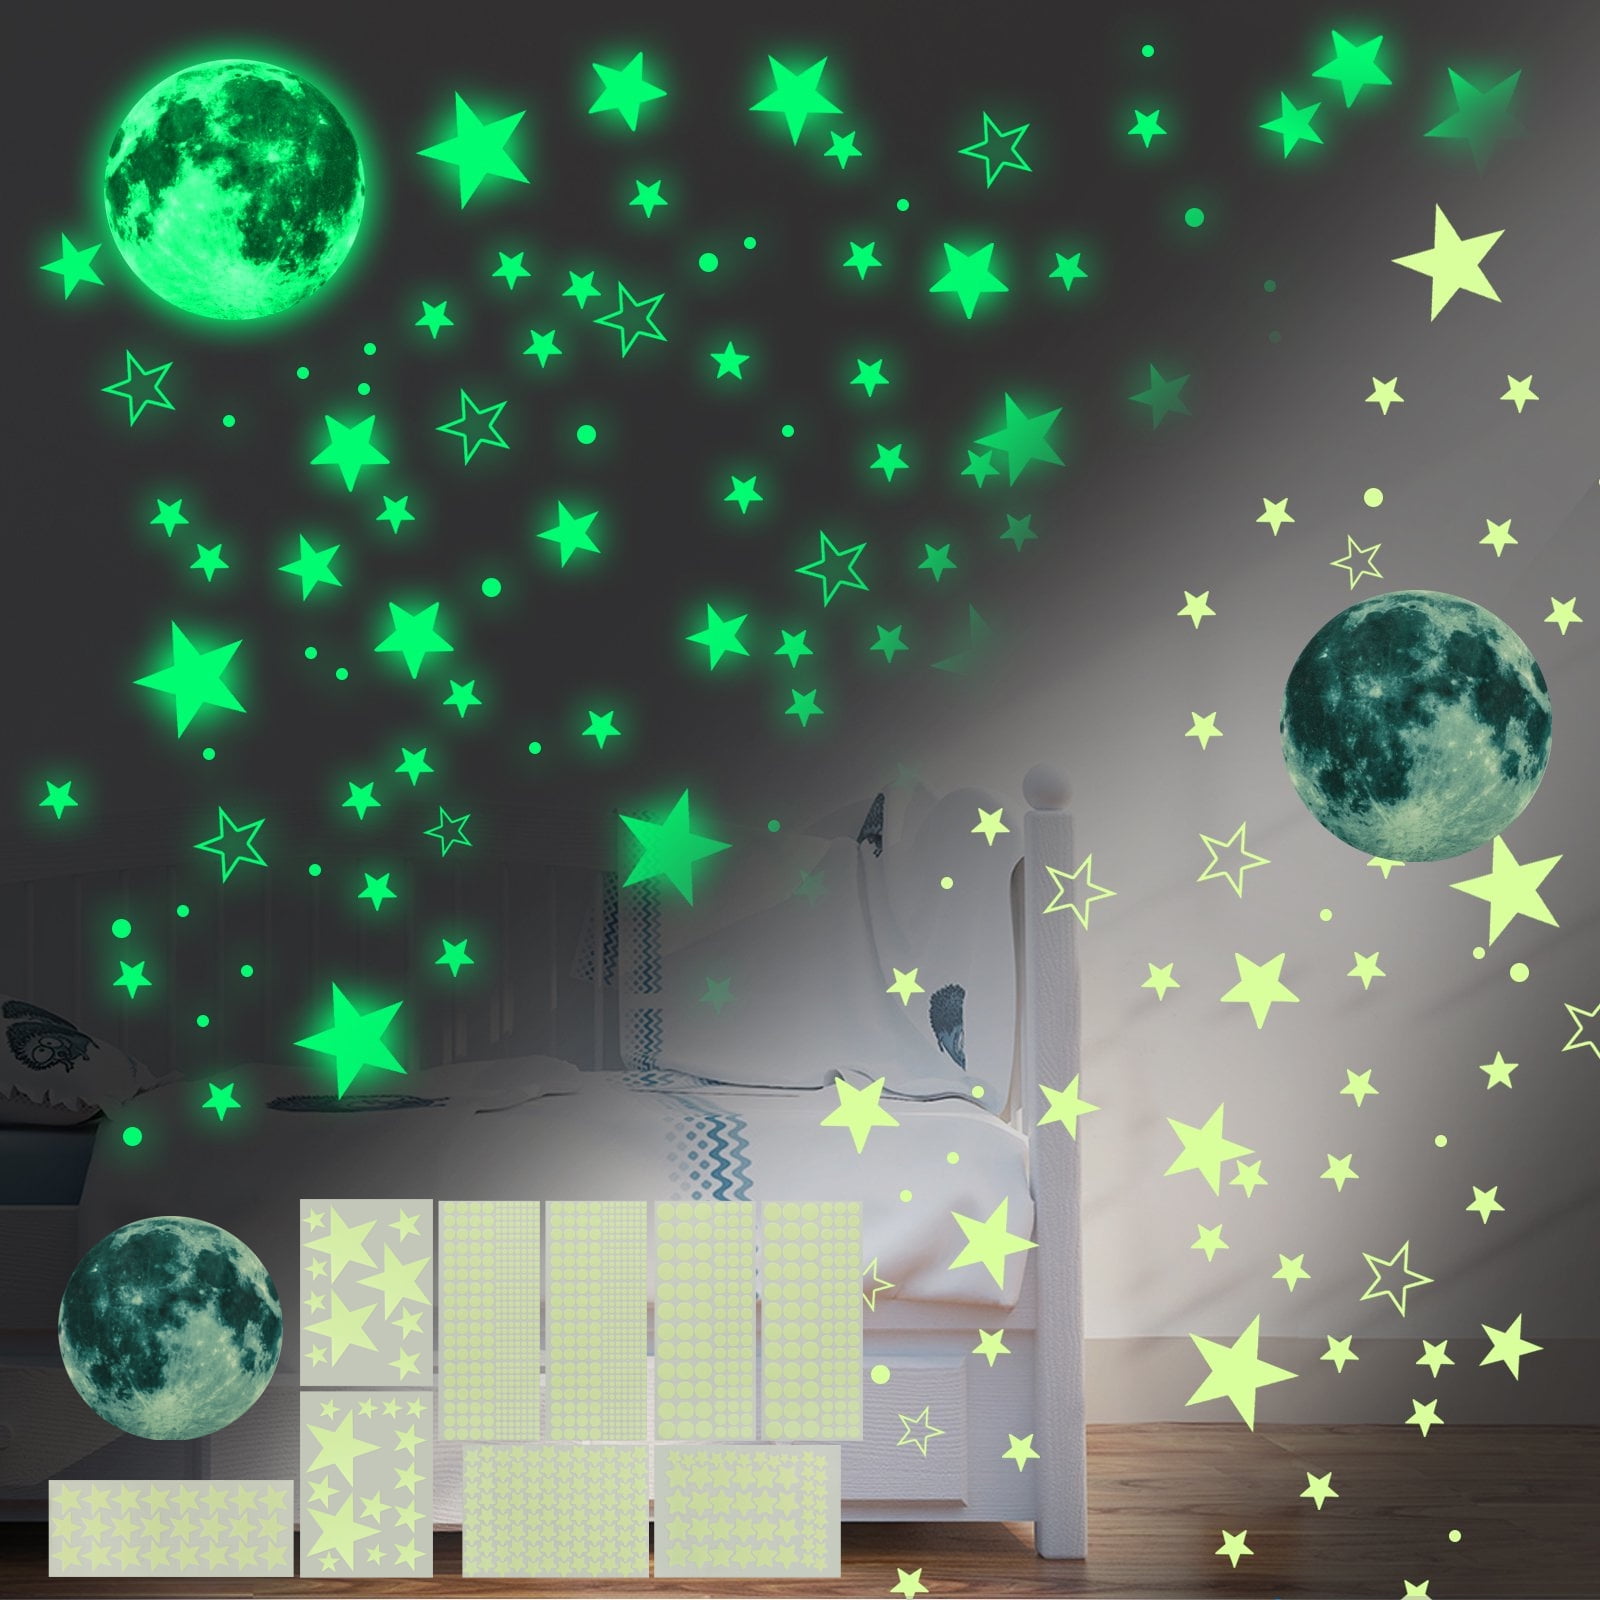 Glow in the Dark Full Moon and Star Wall Sticker Bedroom Ceiling 402pcs 